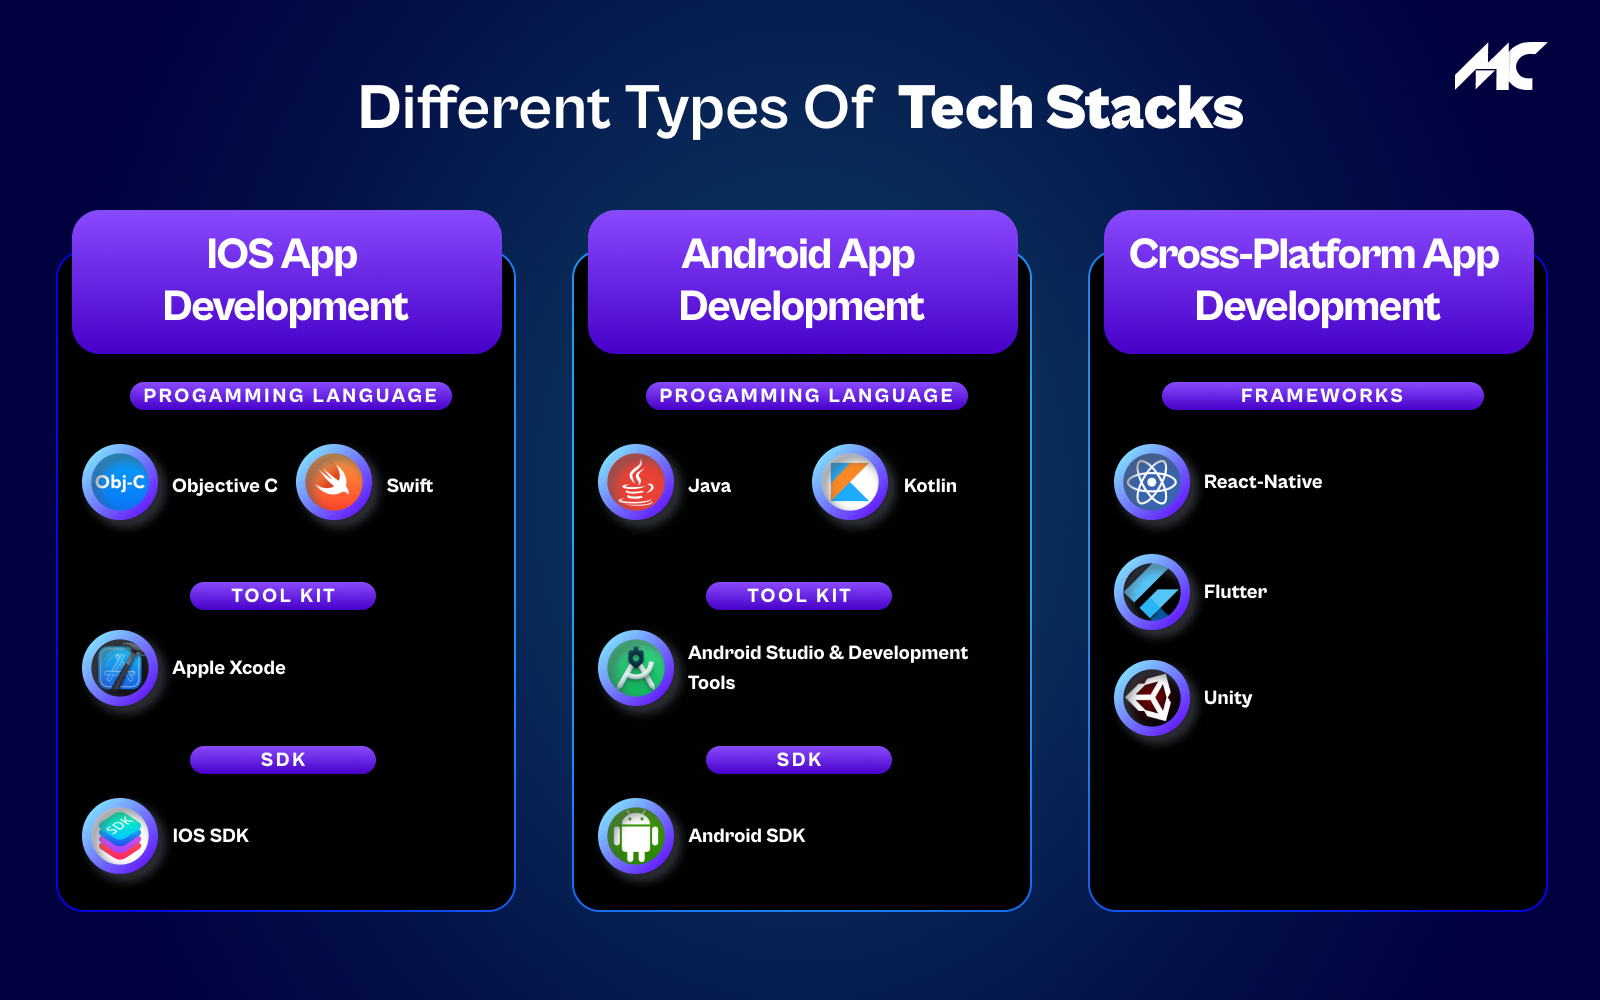 Different Types of Tech Stacks